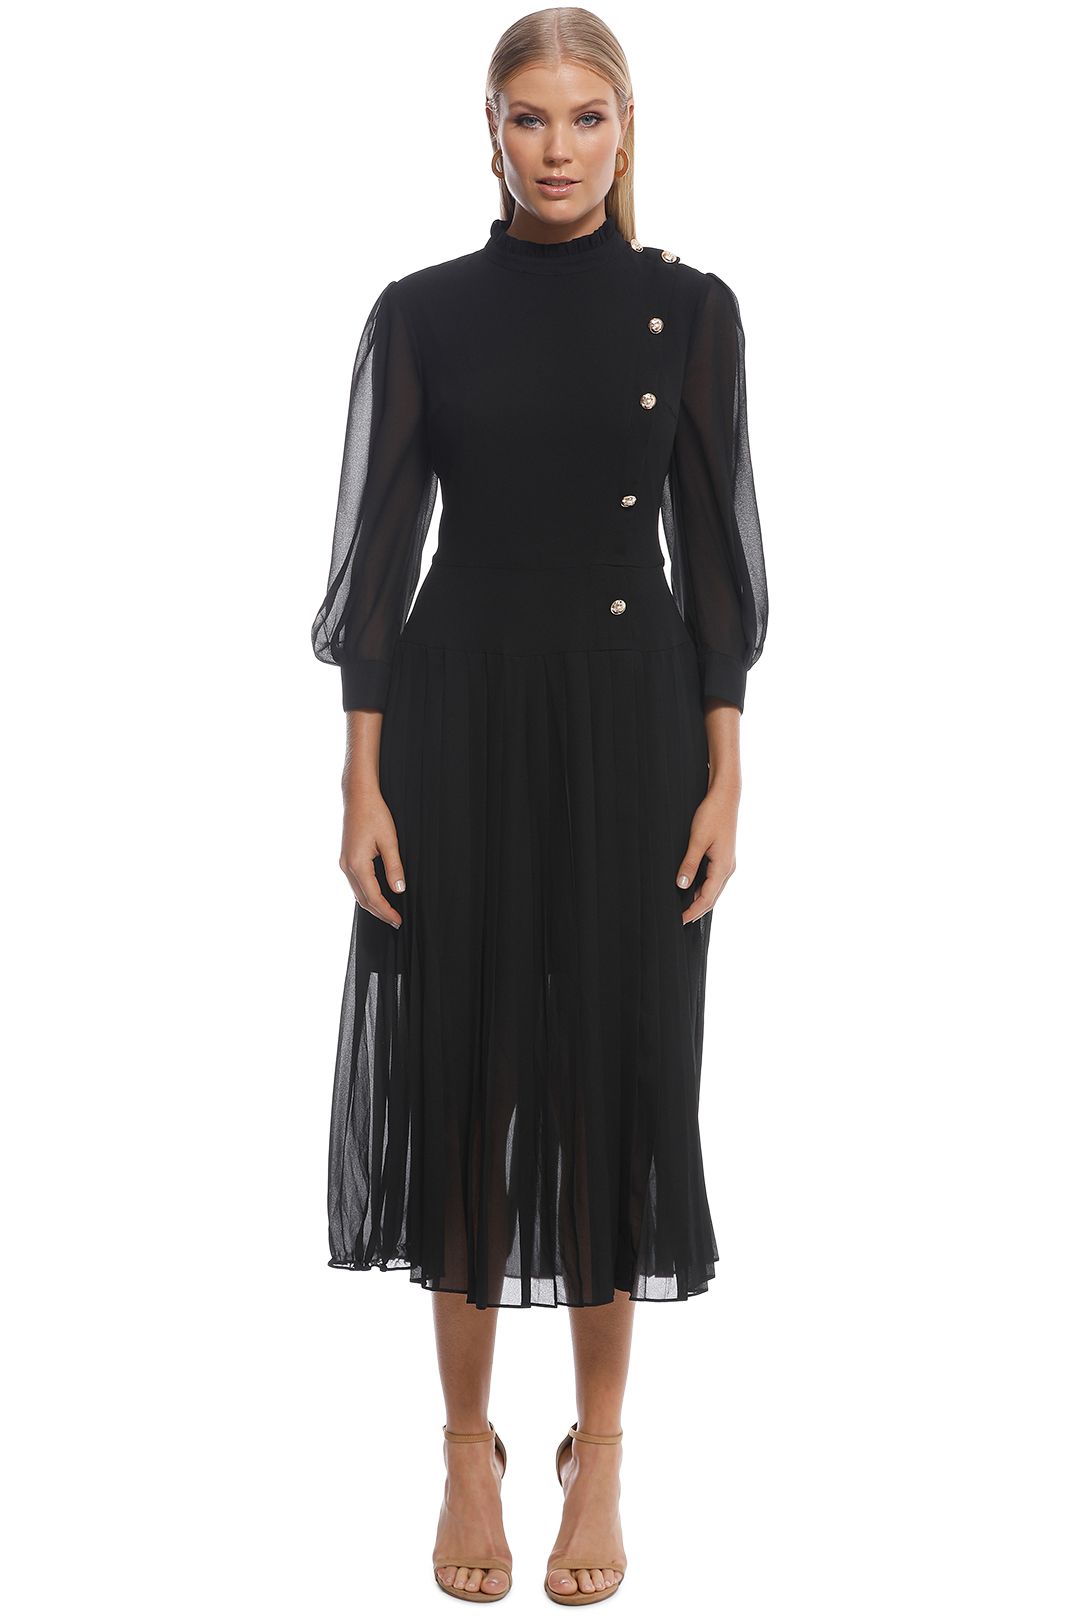 Cooper St - Is This Love Long Sleeve Midi Dress - Black - Front